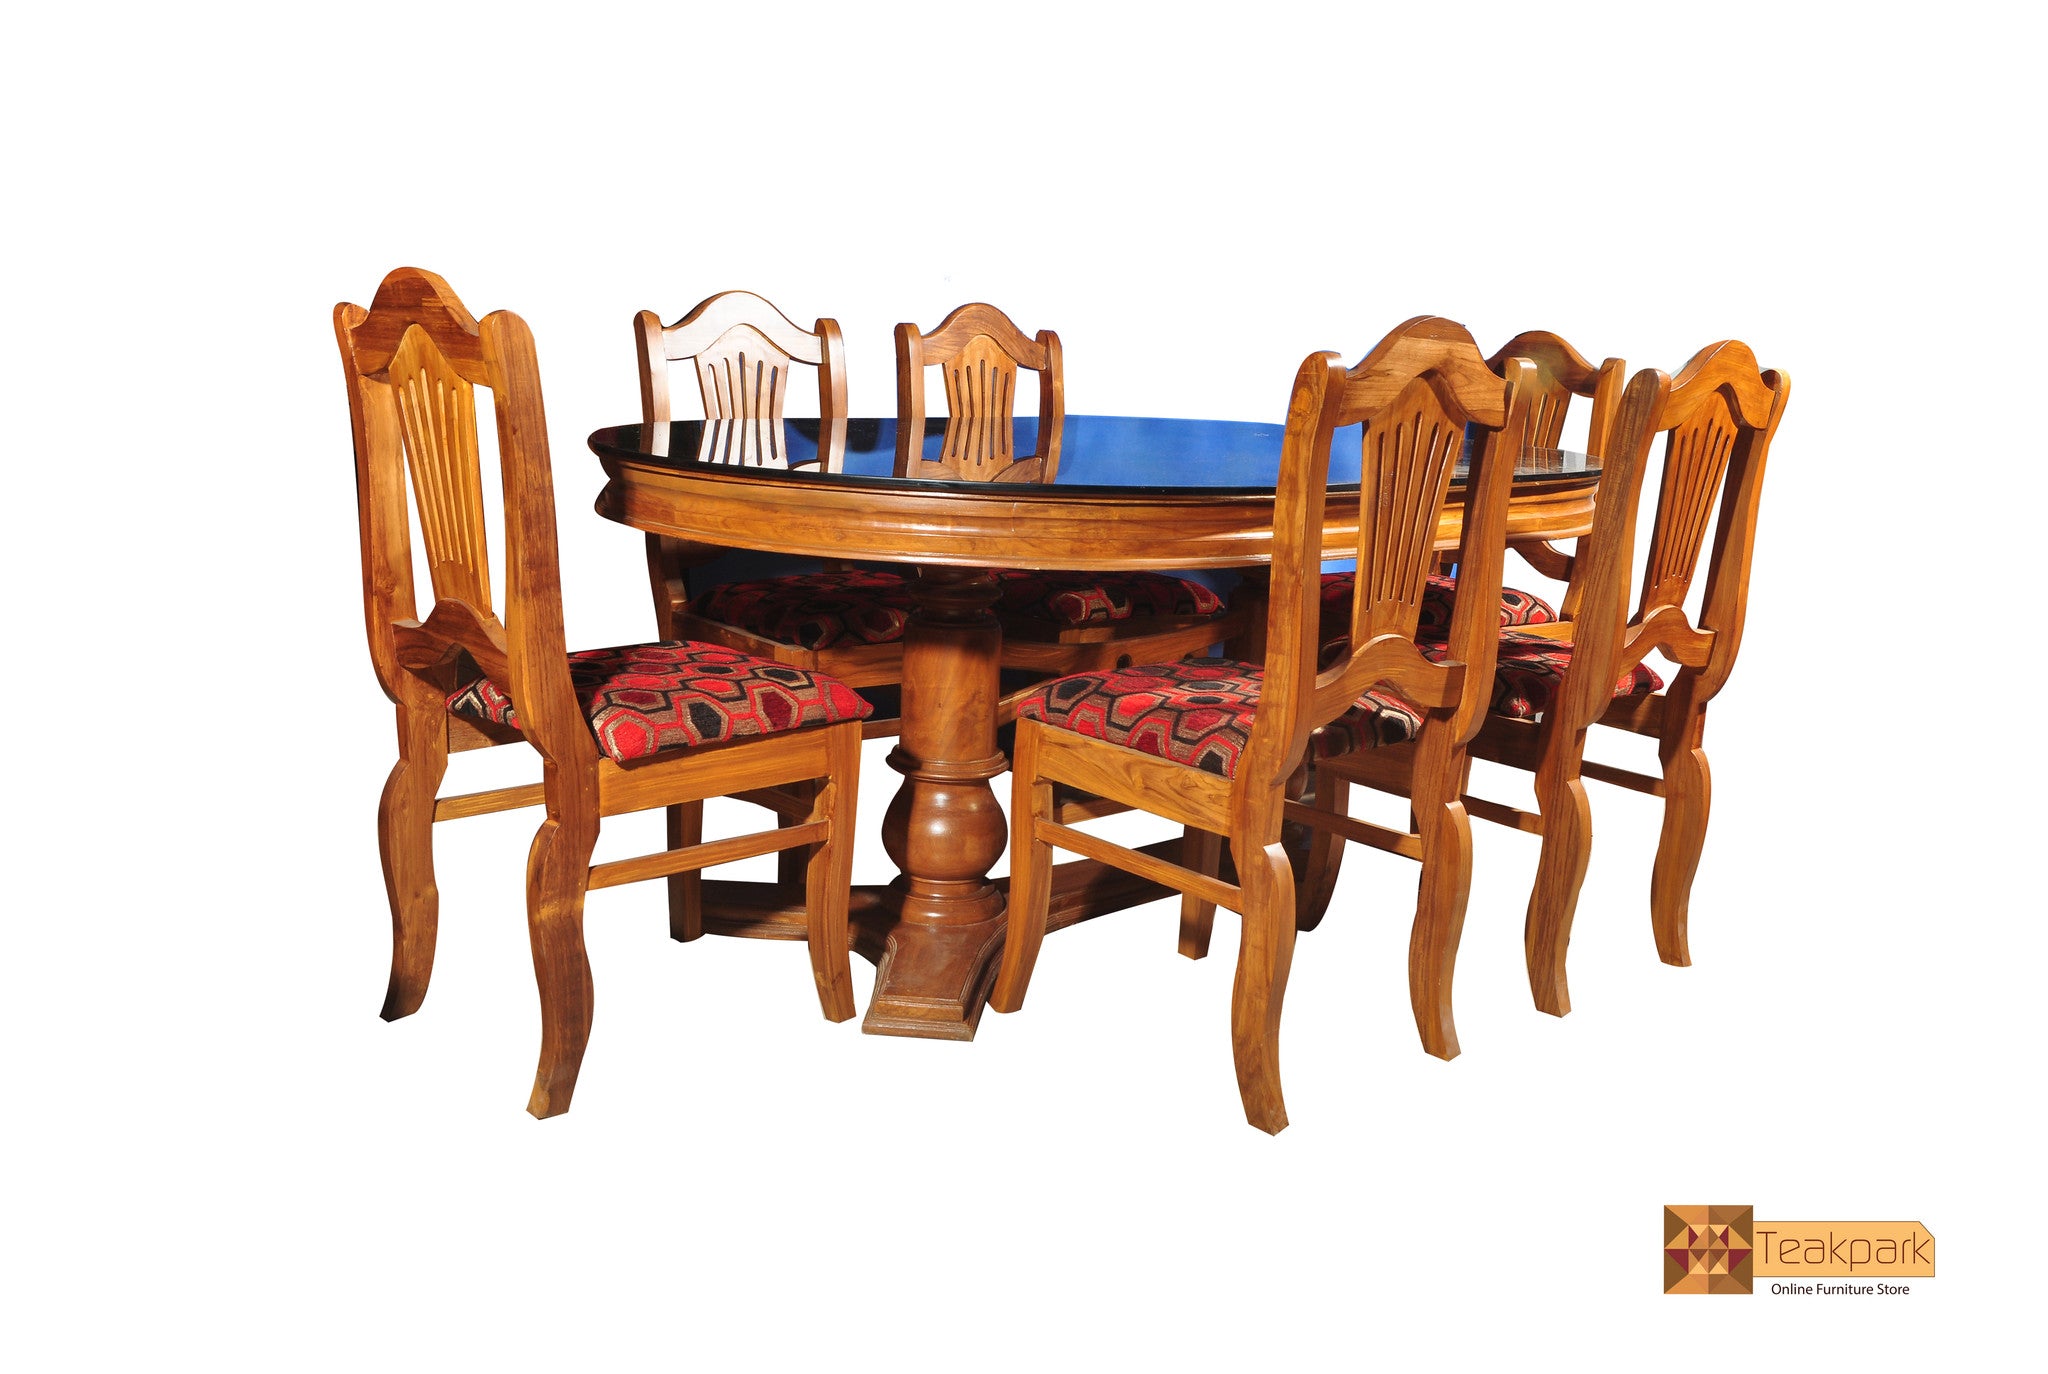 Nila Oval Solid Teak Wood Dining Set Glass Top Table With 6 Chairs Teakpark